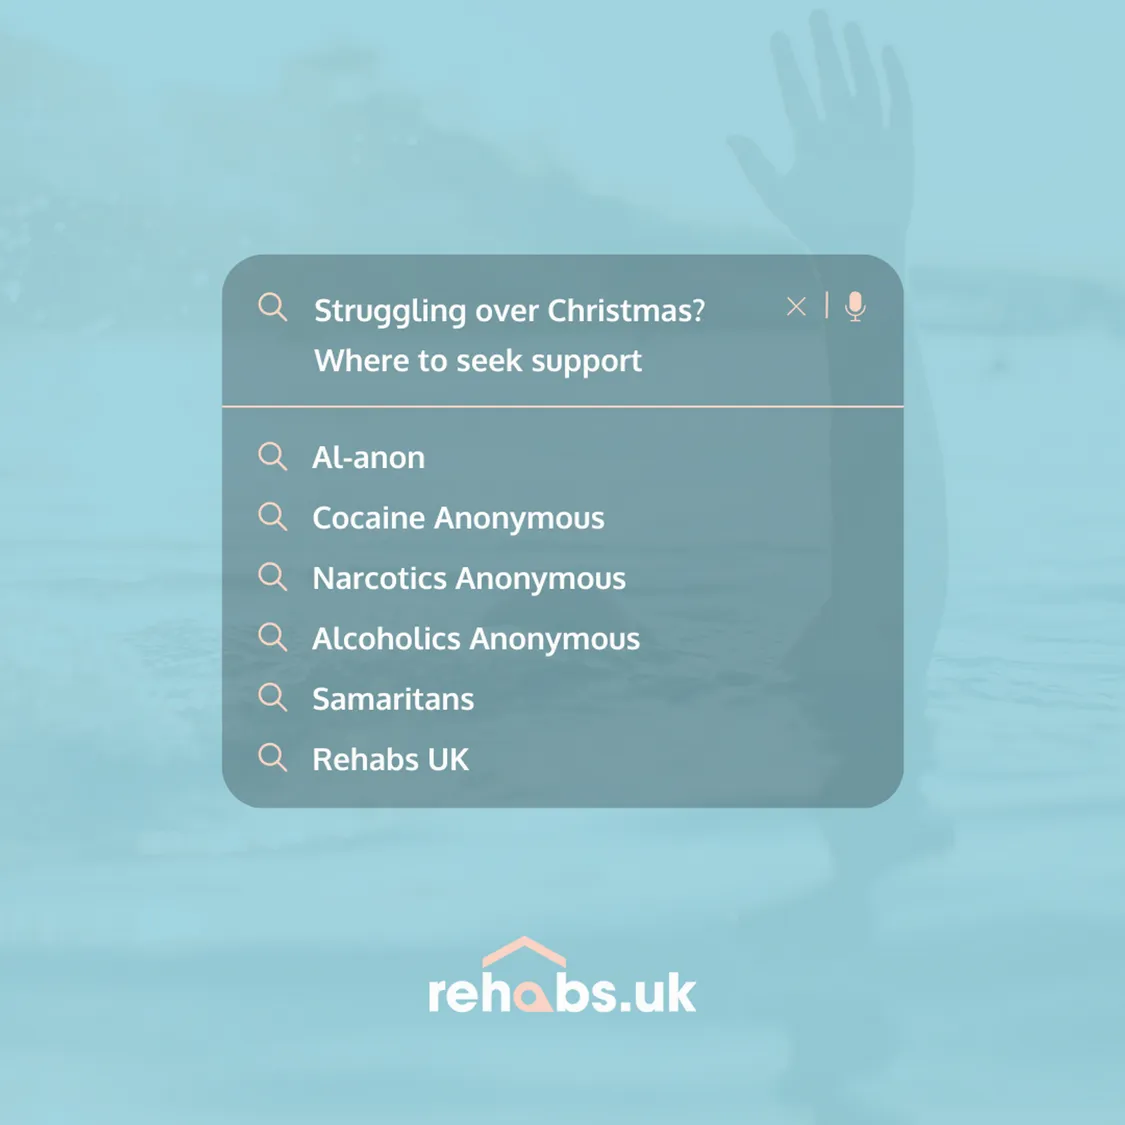 Info graphic showing where someone struggling with drug or alcohol addiction canseek support over Christmas